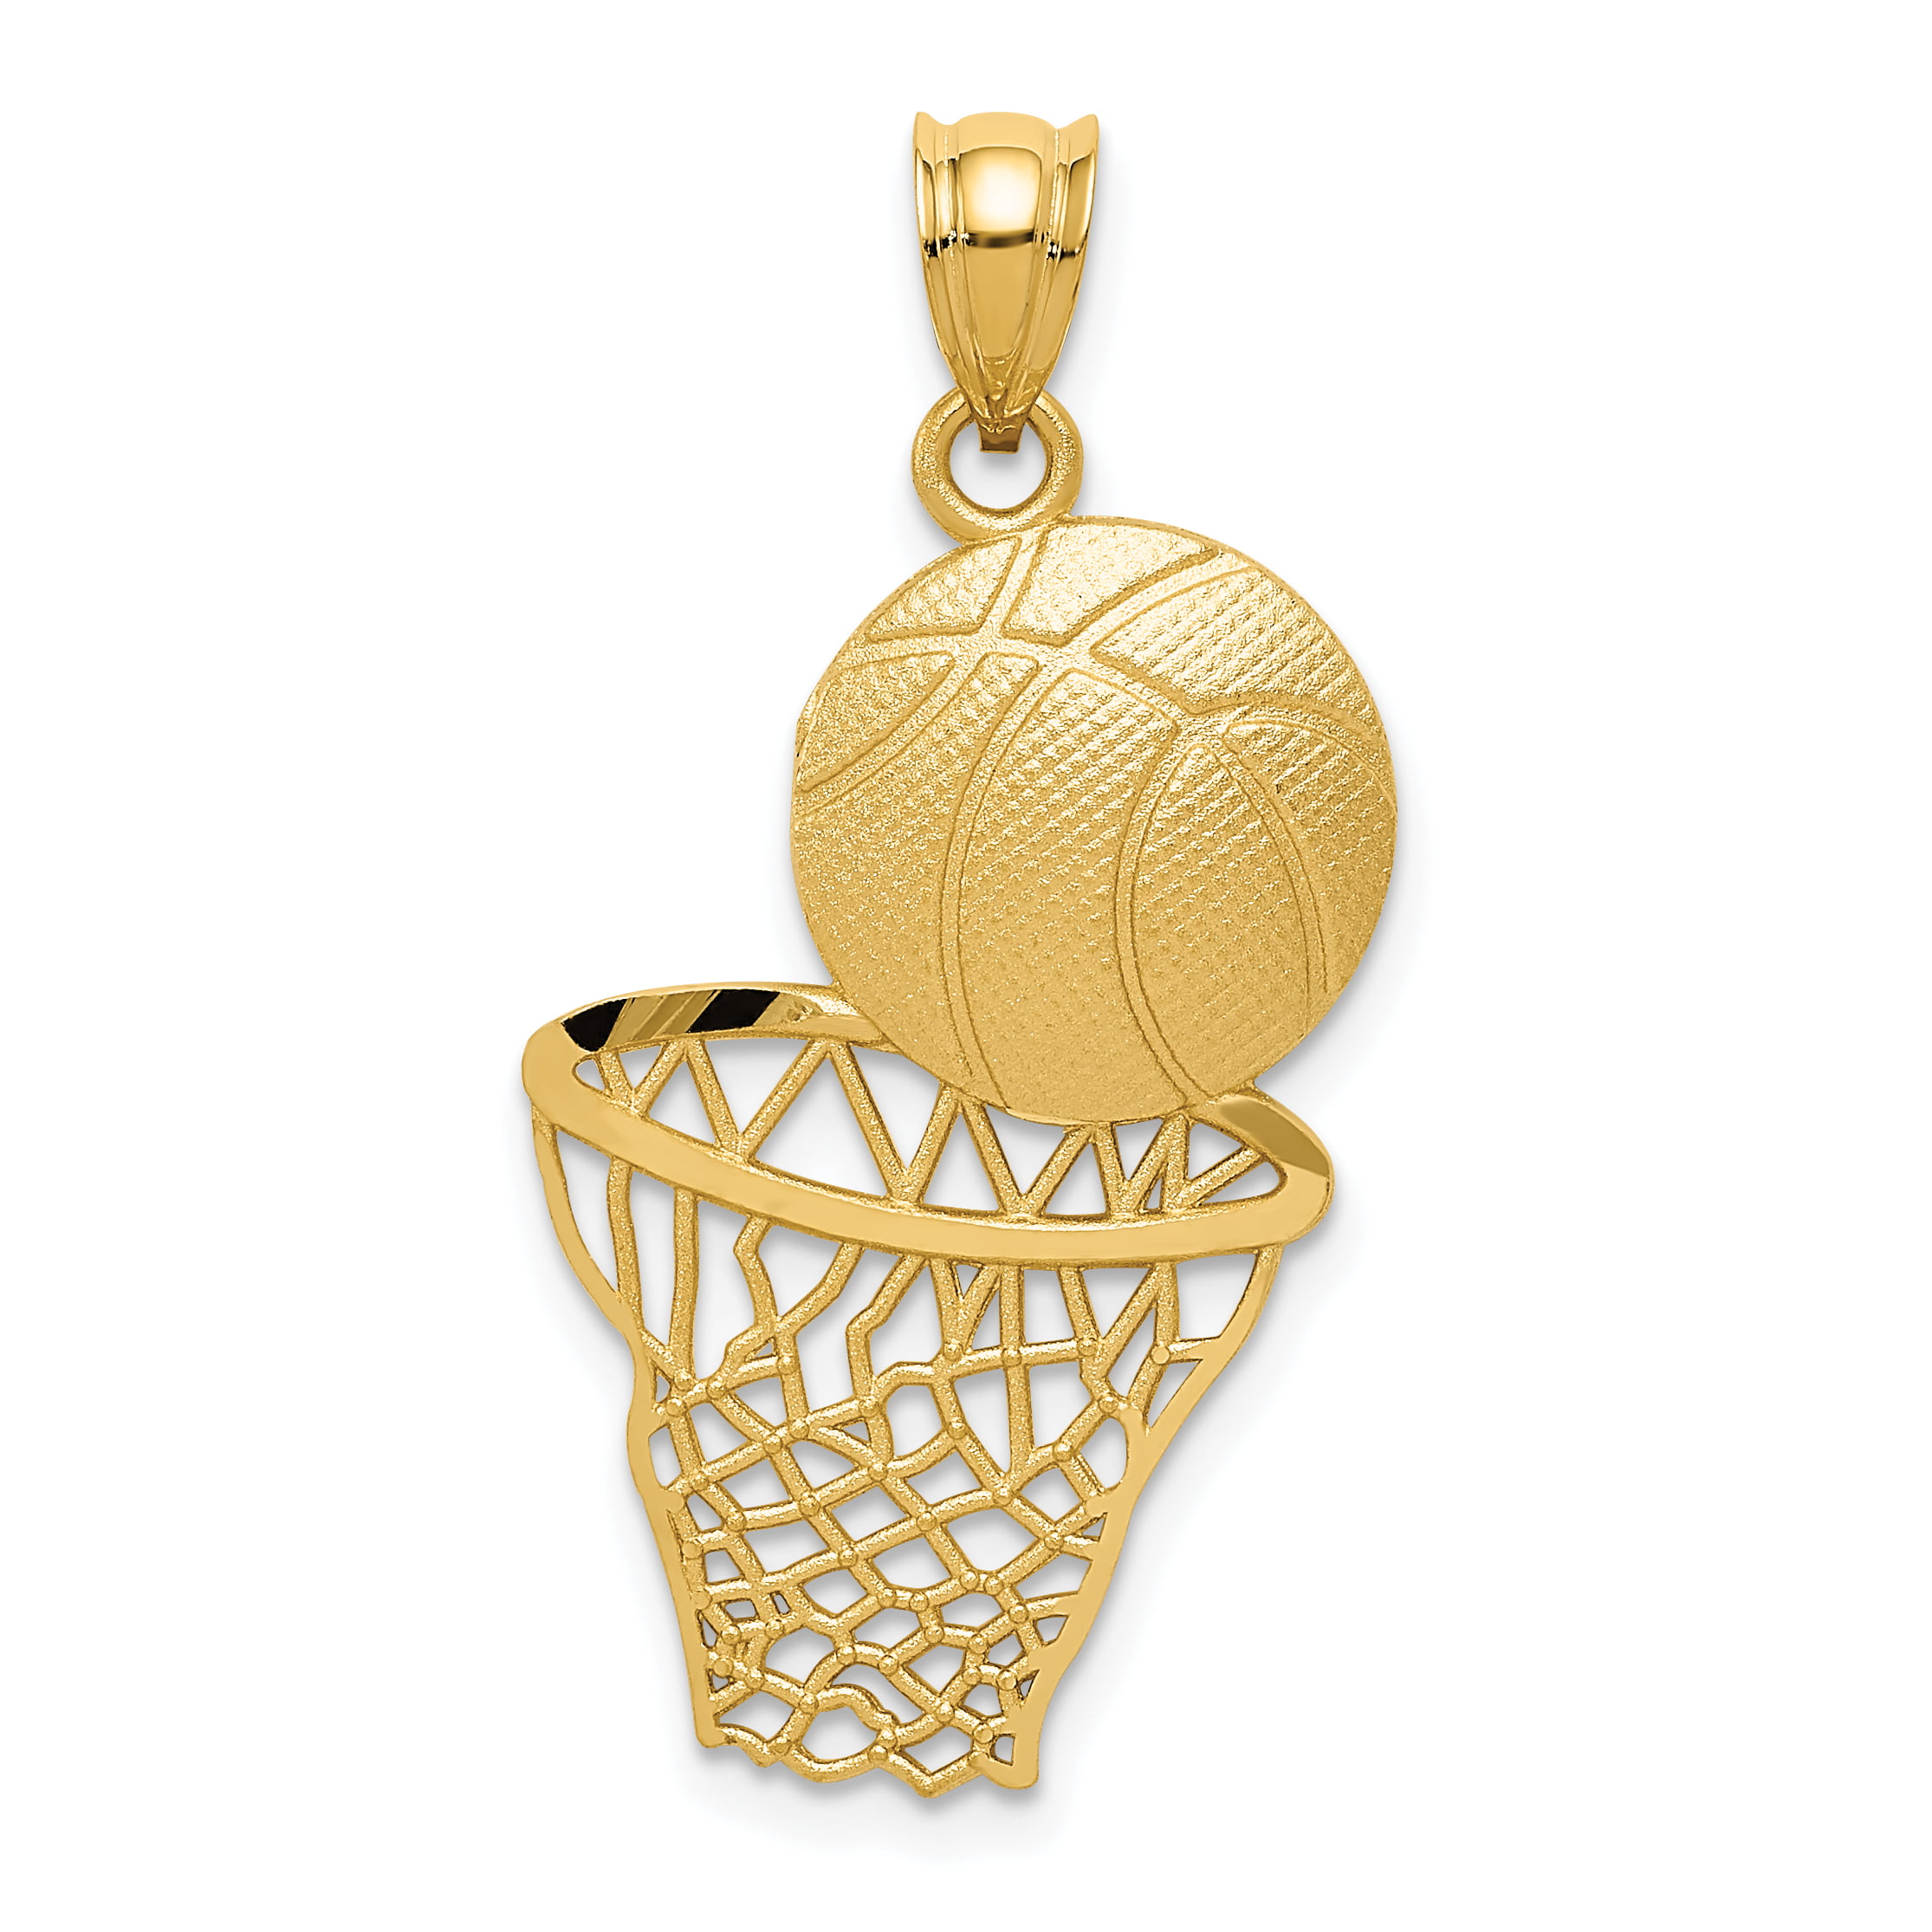 10k Yellow Gold Basketball Net Pendant Charm Necklace Sport Fine Jewelry Gifts For Women For Her 